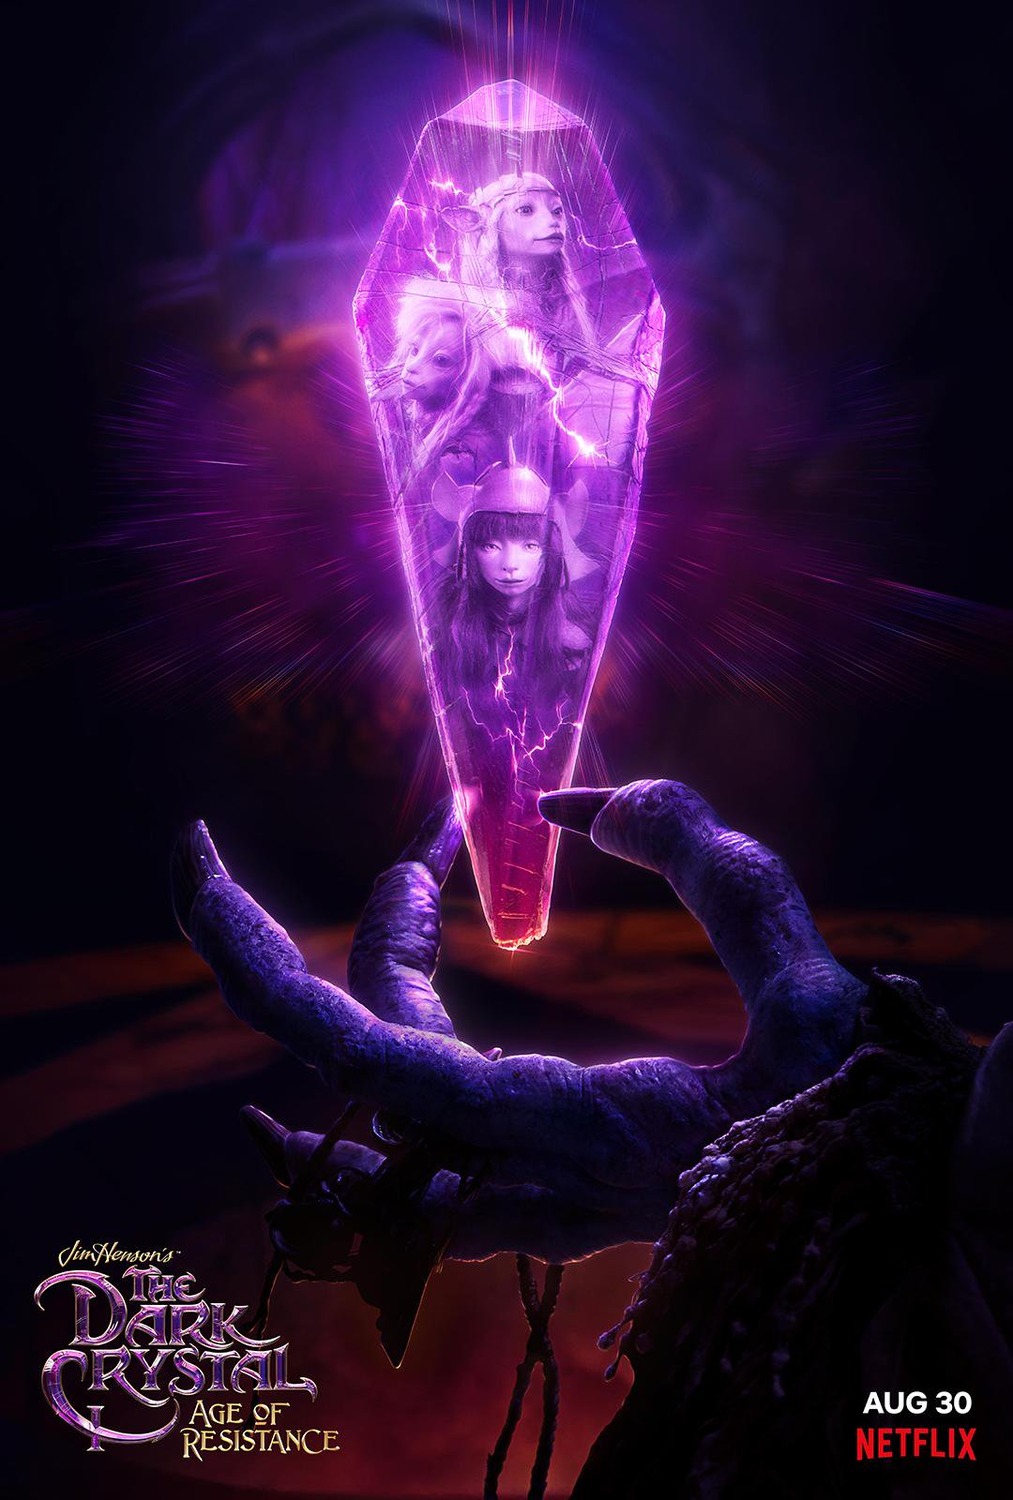 Extra Large TV Poster Image for The Dark Crystal: Age of Resistance (#5 of 5)